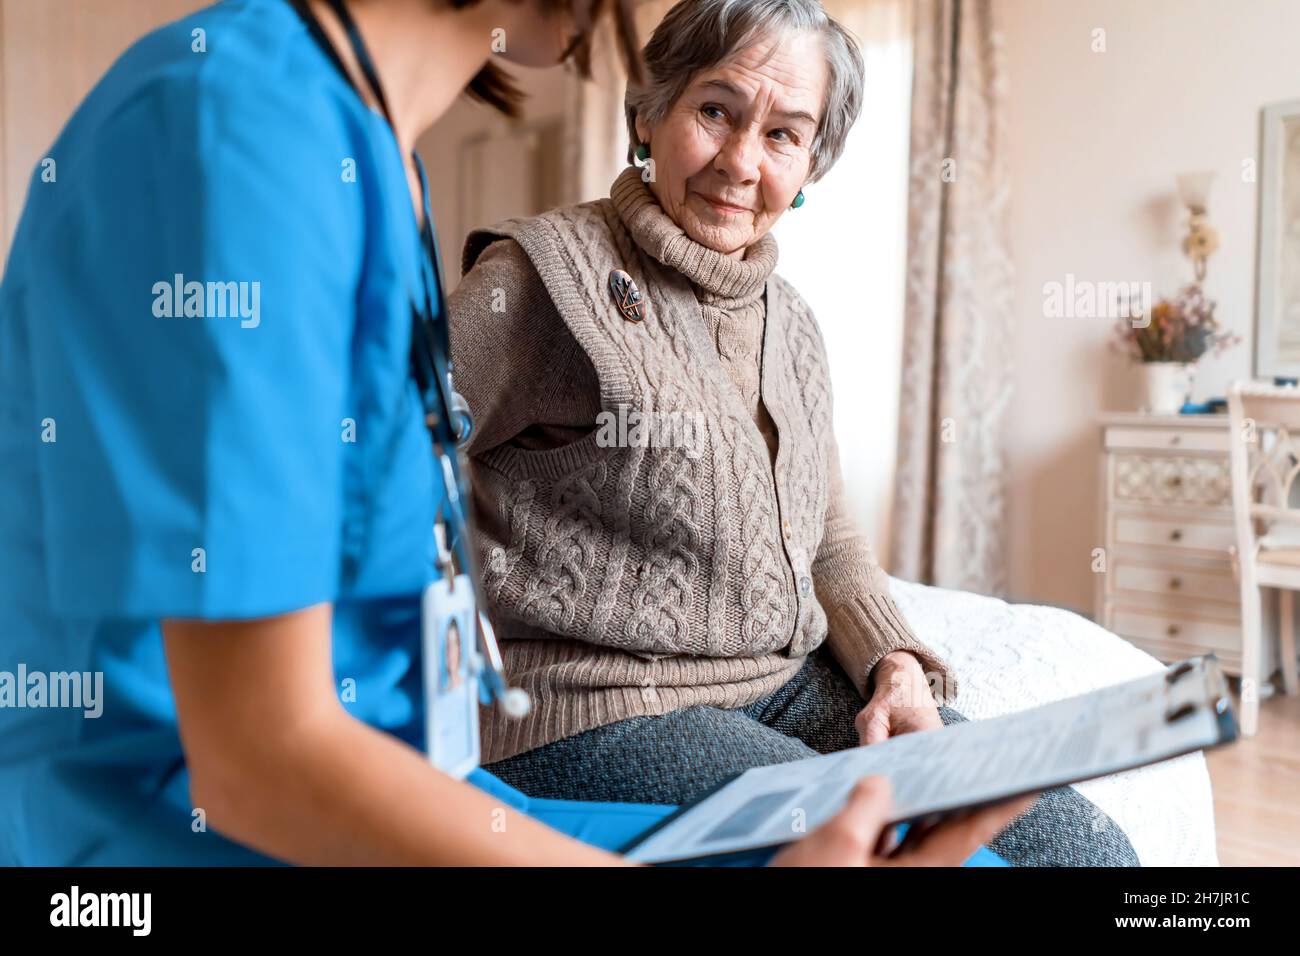 Young nurse is caring for an elderly 80-year-old woman at home, Stock Photo